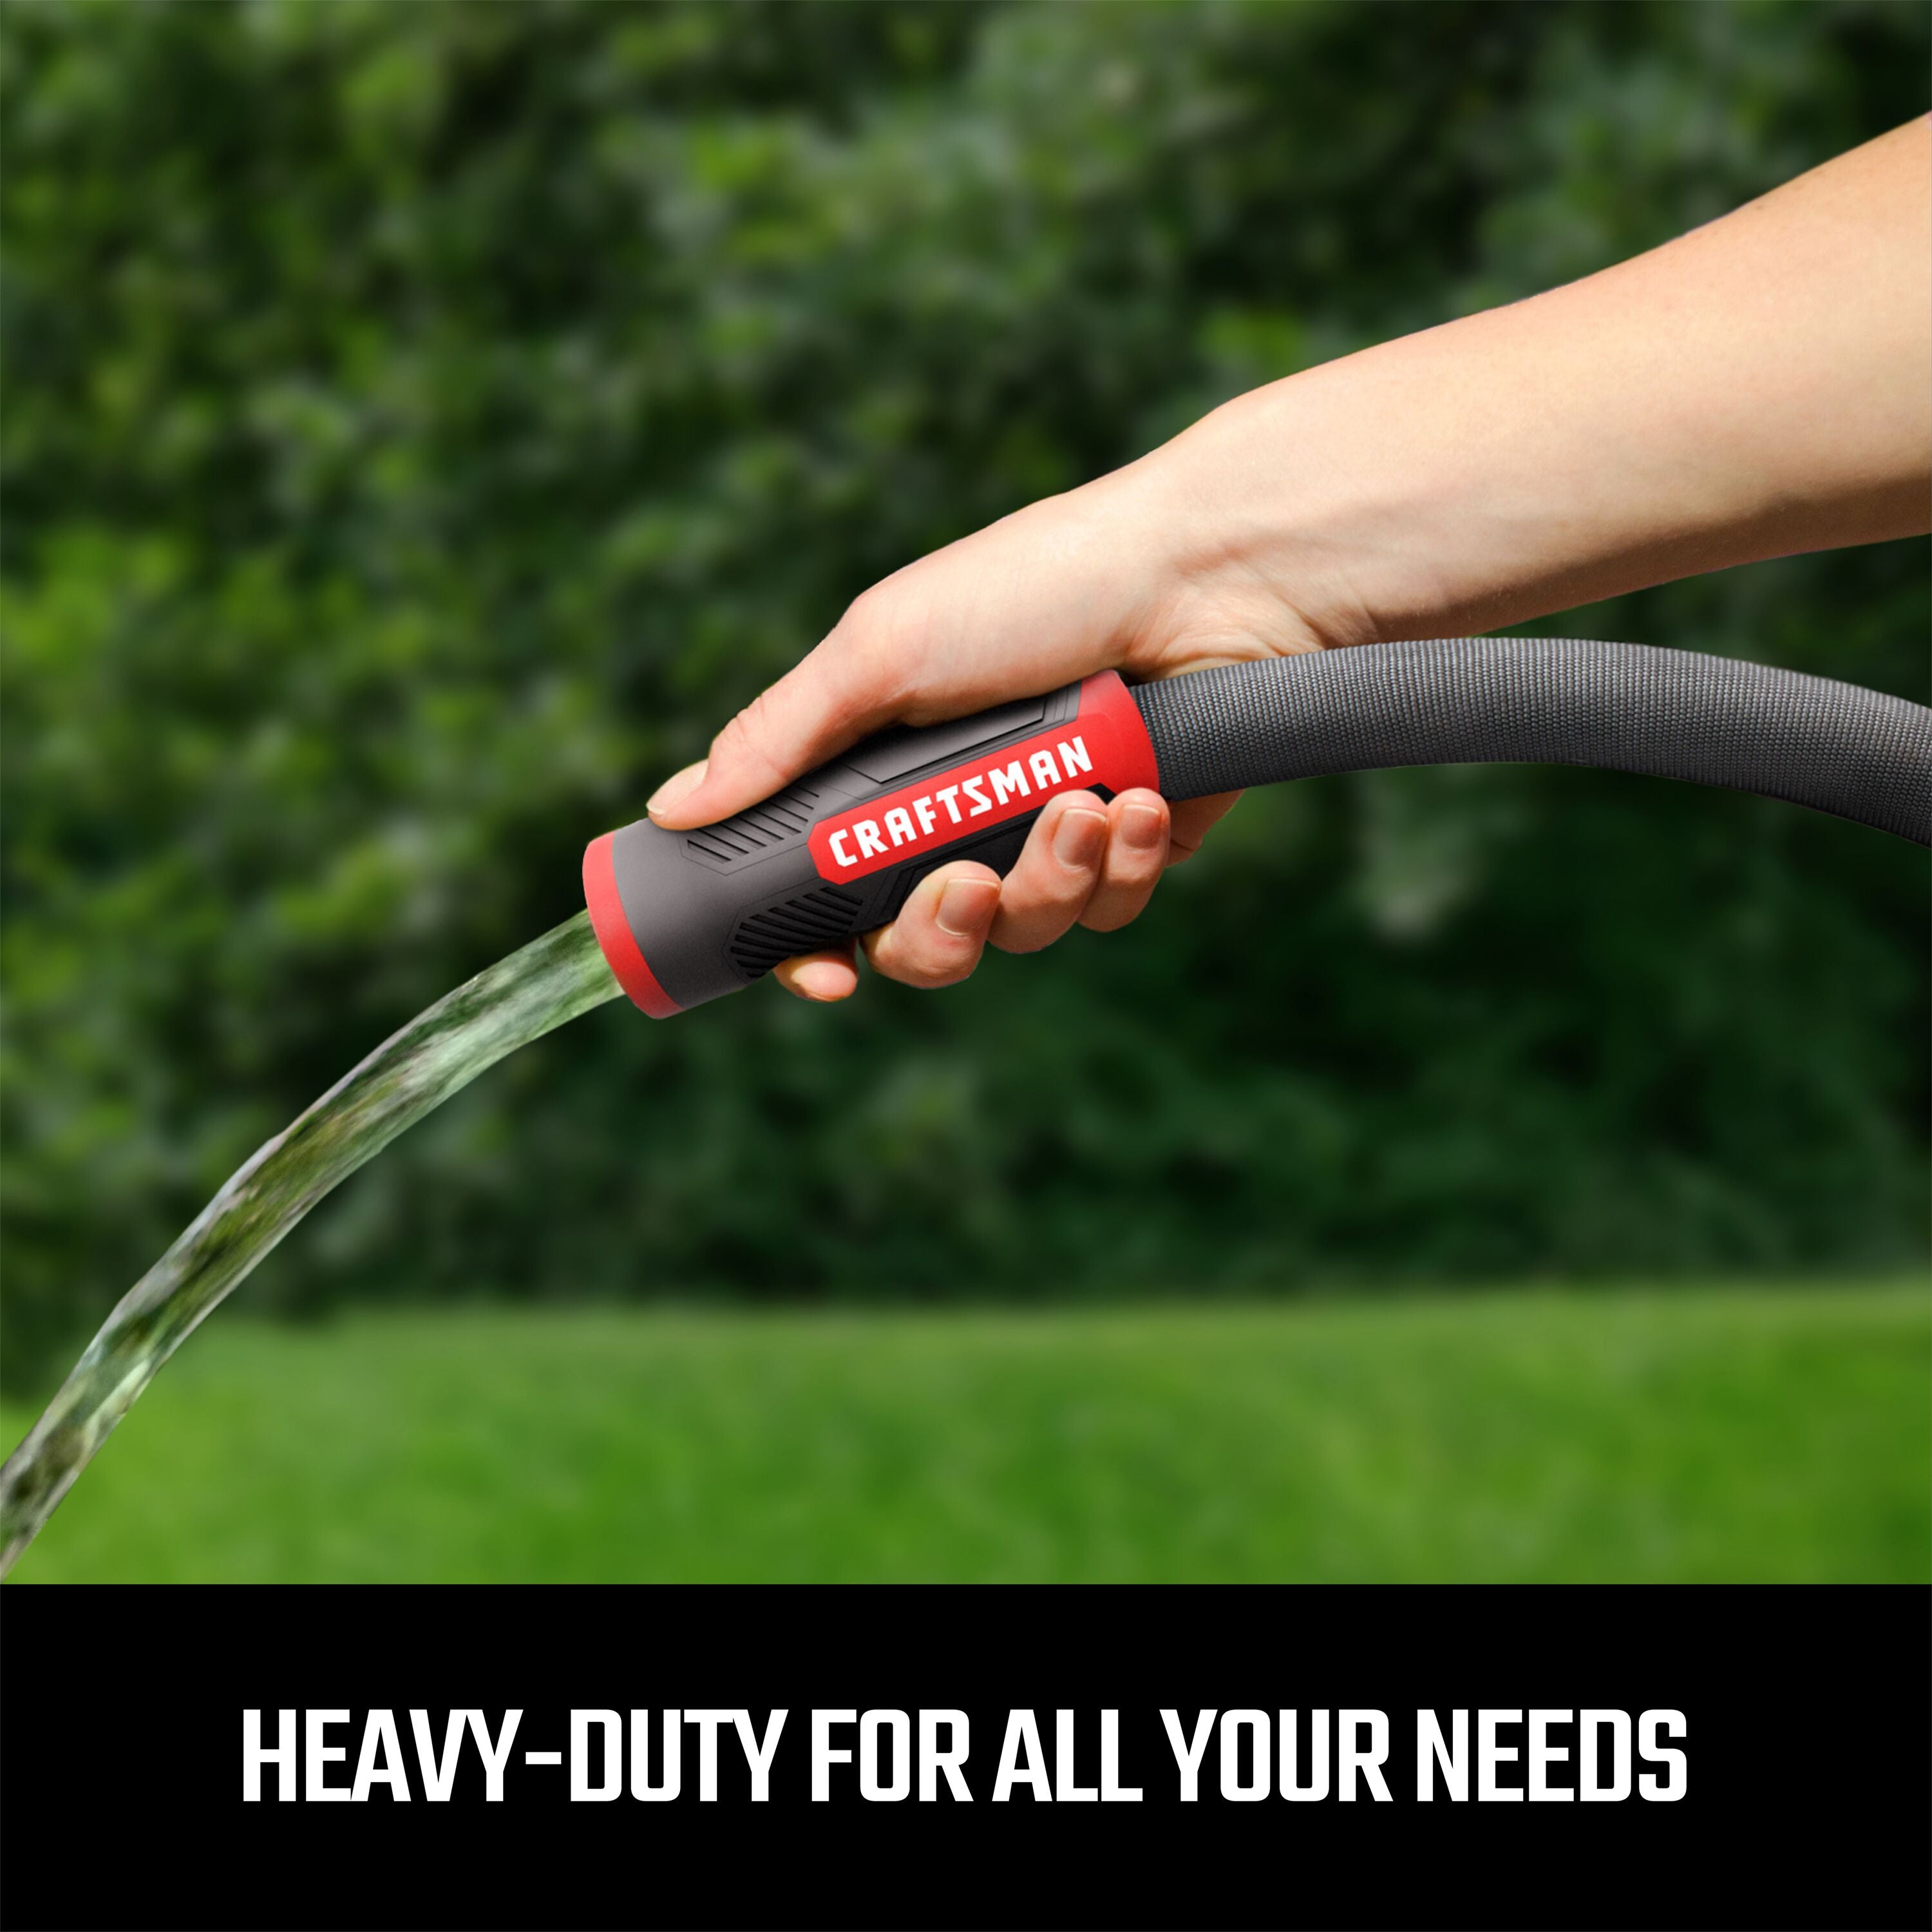 Heavy-duty fabric hose, 100-foot by 5/8 inch. Emitting a stream of water graphic